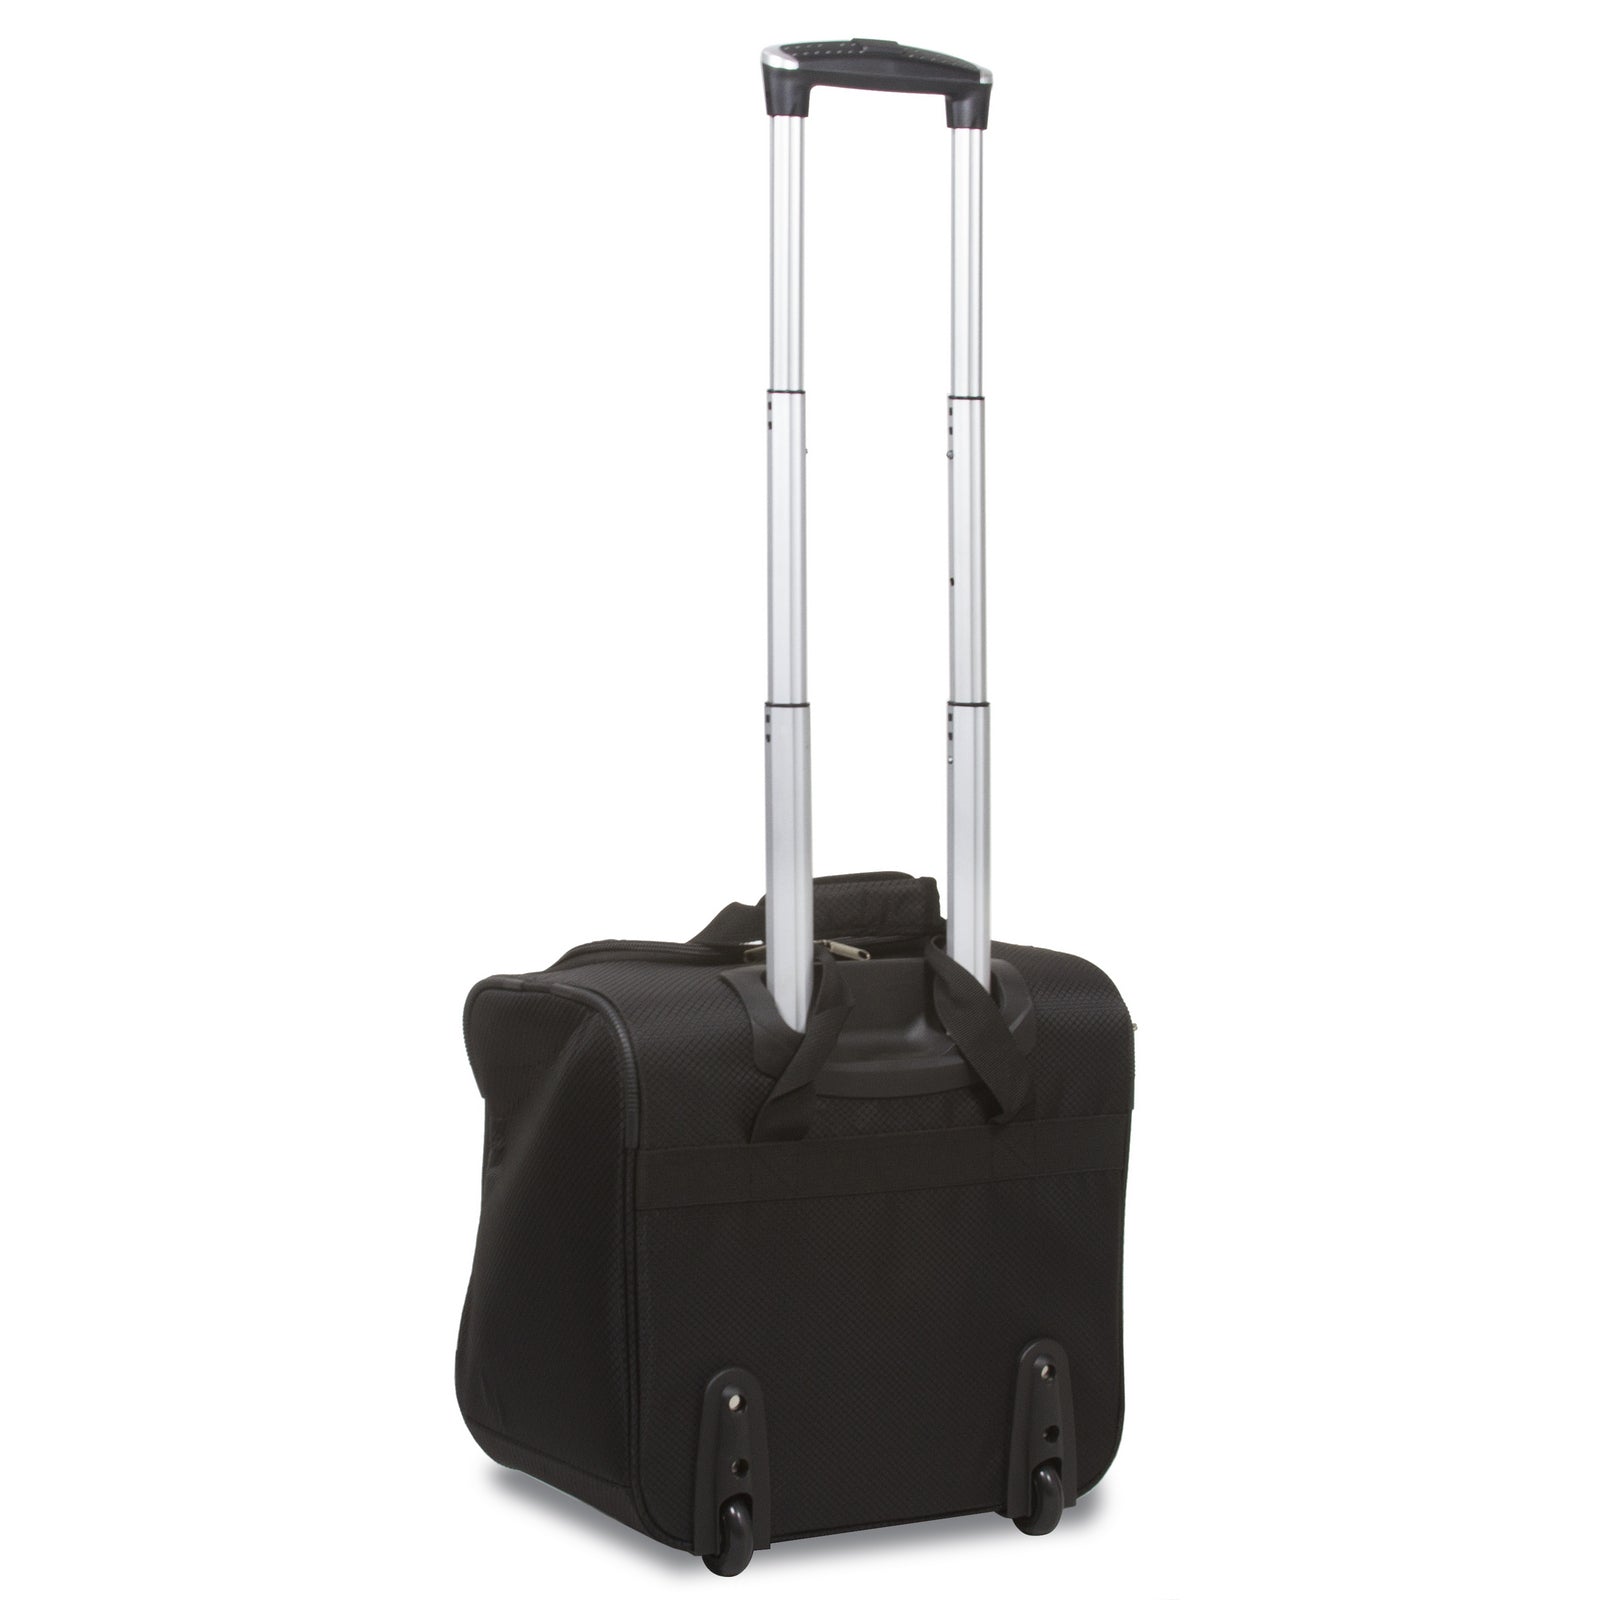 Dejuno Lightweight Wheeled 15" Carry-On Underseater Tote